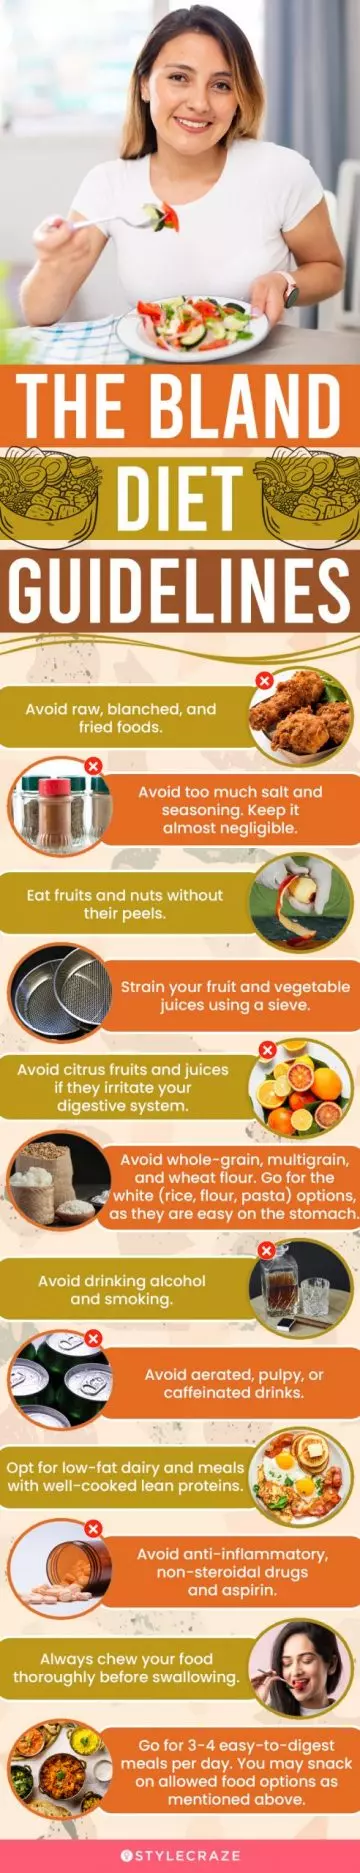 the bland diet guidelines (infographic)